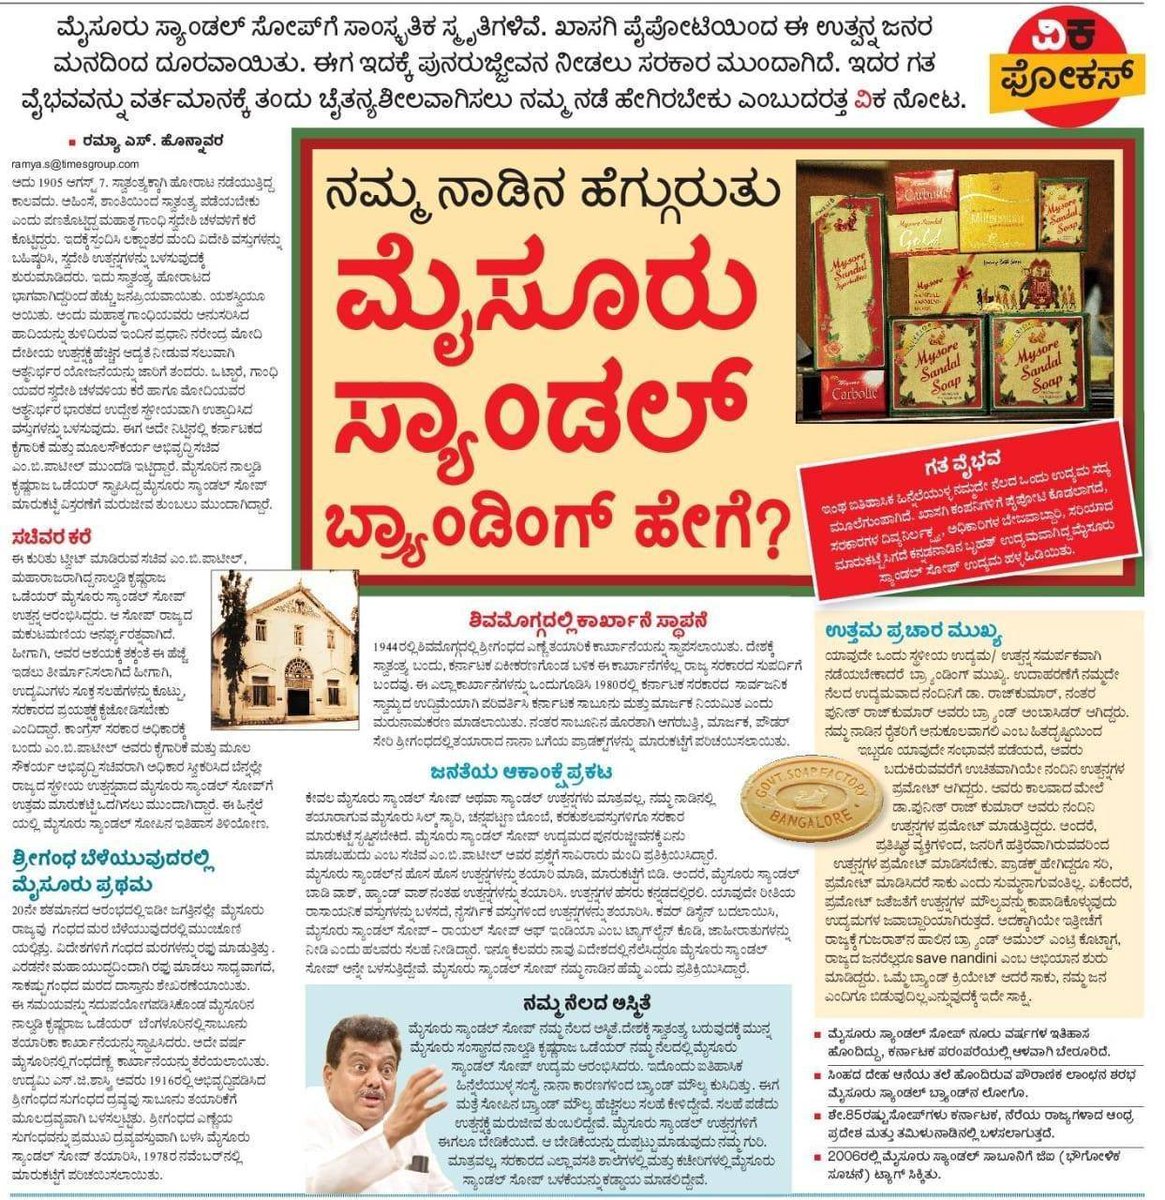 Rediscovering the allure of Mysore Sandal Soap. Proud to see this iconic brand making a comeback! 🤩

#MysuruCity
#MysoreSandalSoap